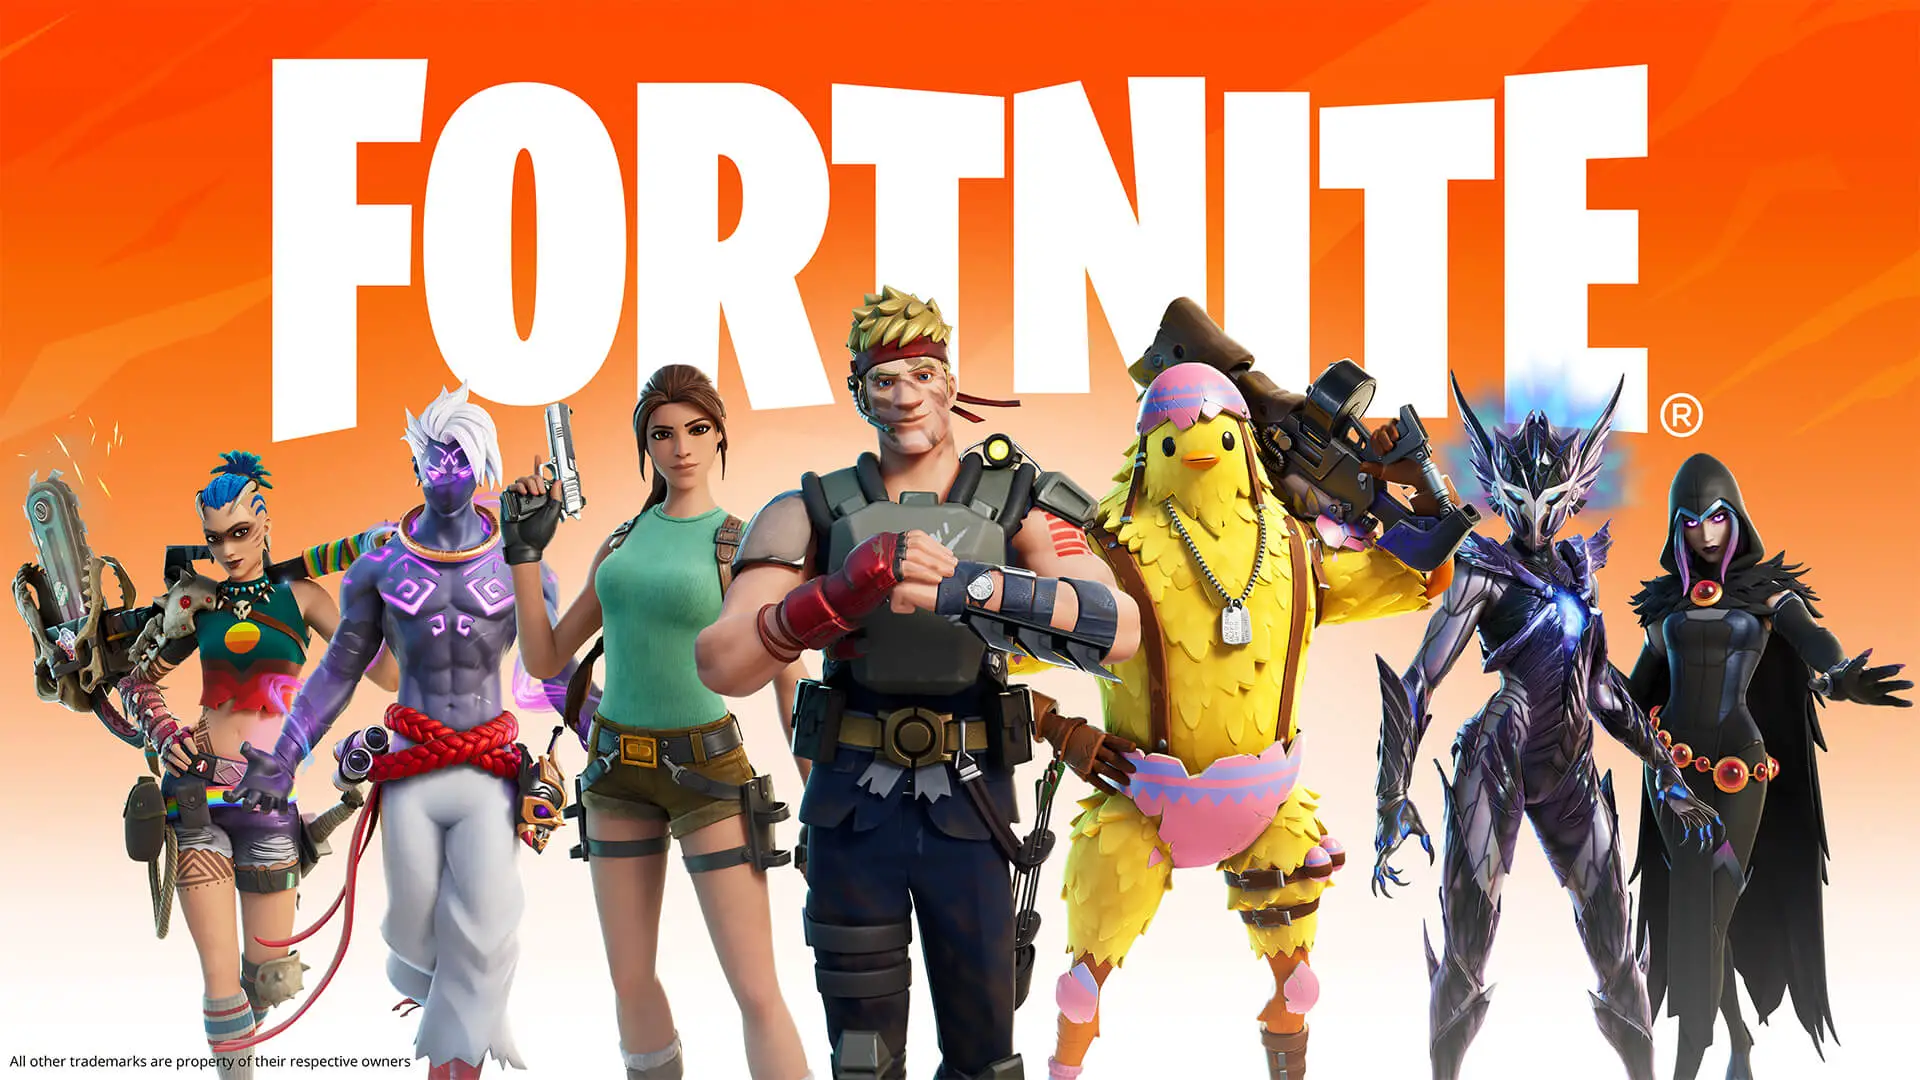 insights into fortnite’s launch